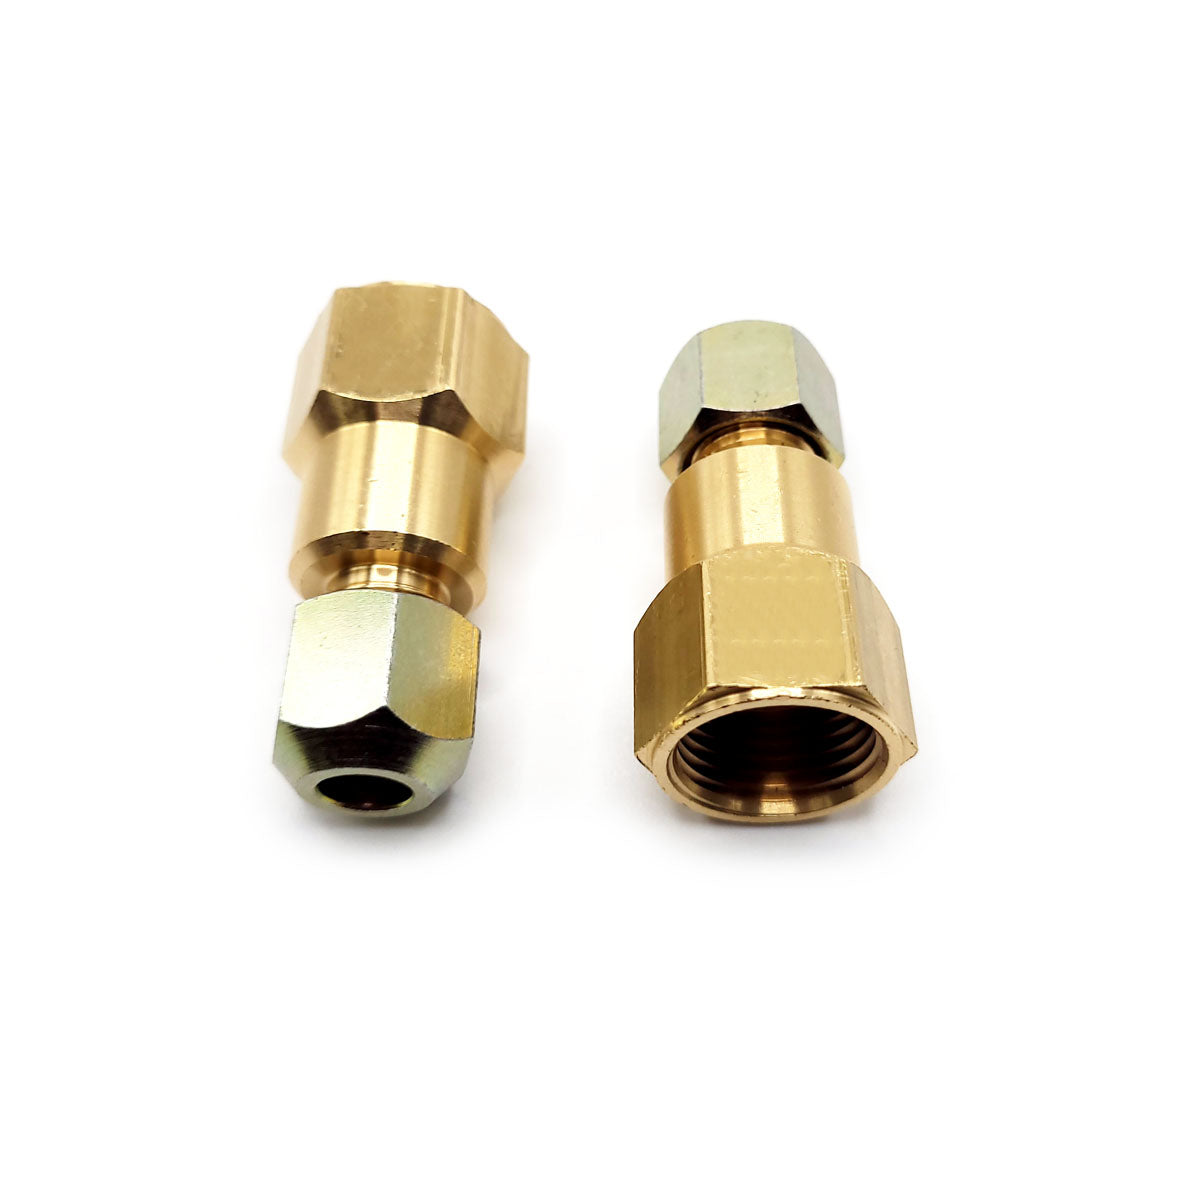 JIC Female 3/4 UNF Connector to G1/4″ Fitting for JIC Fill Valves flexi FARO pipe hose